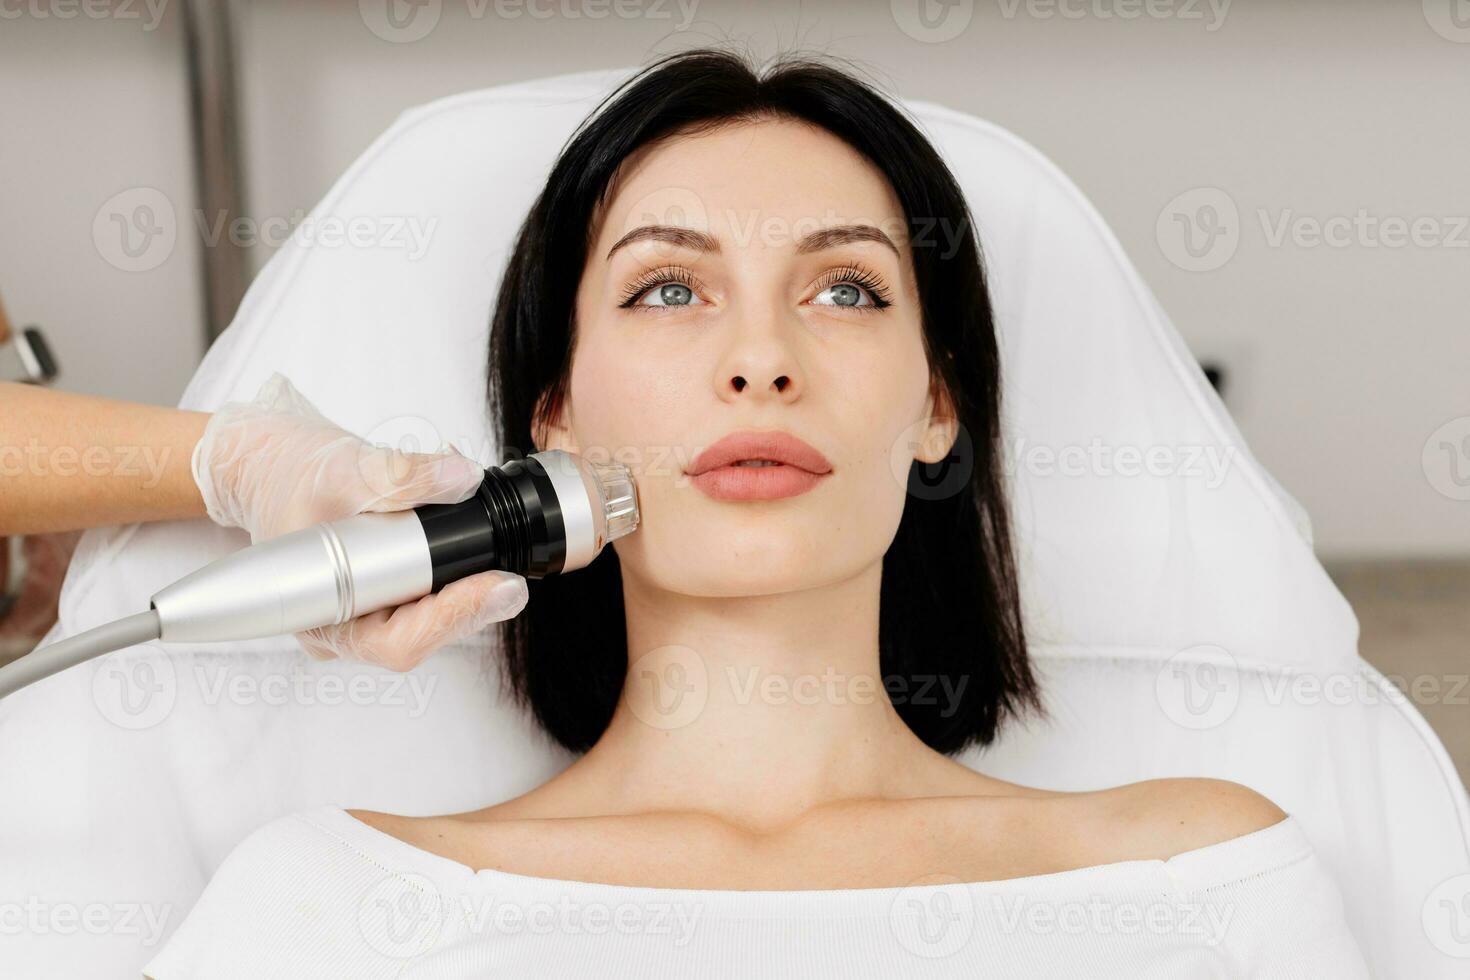 Micro-Needle RF Lifting Neck Skin. Caucasian female getting RF lifting procedure of face and neck area at cosmetology clinic. Professional skincare, beauty treatment photo